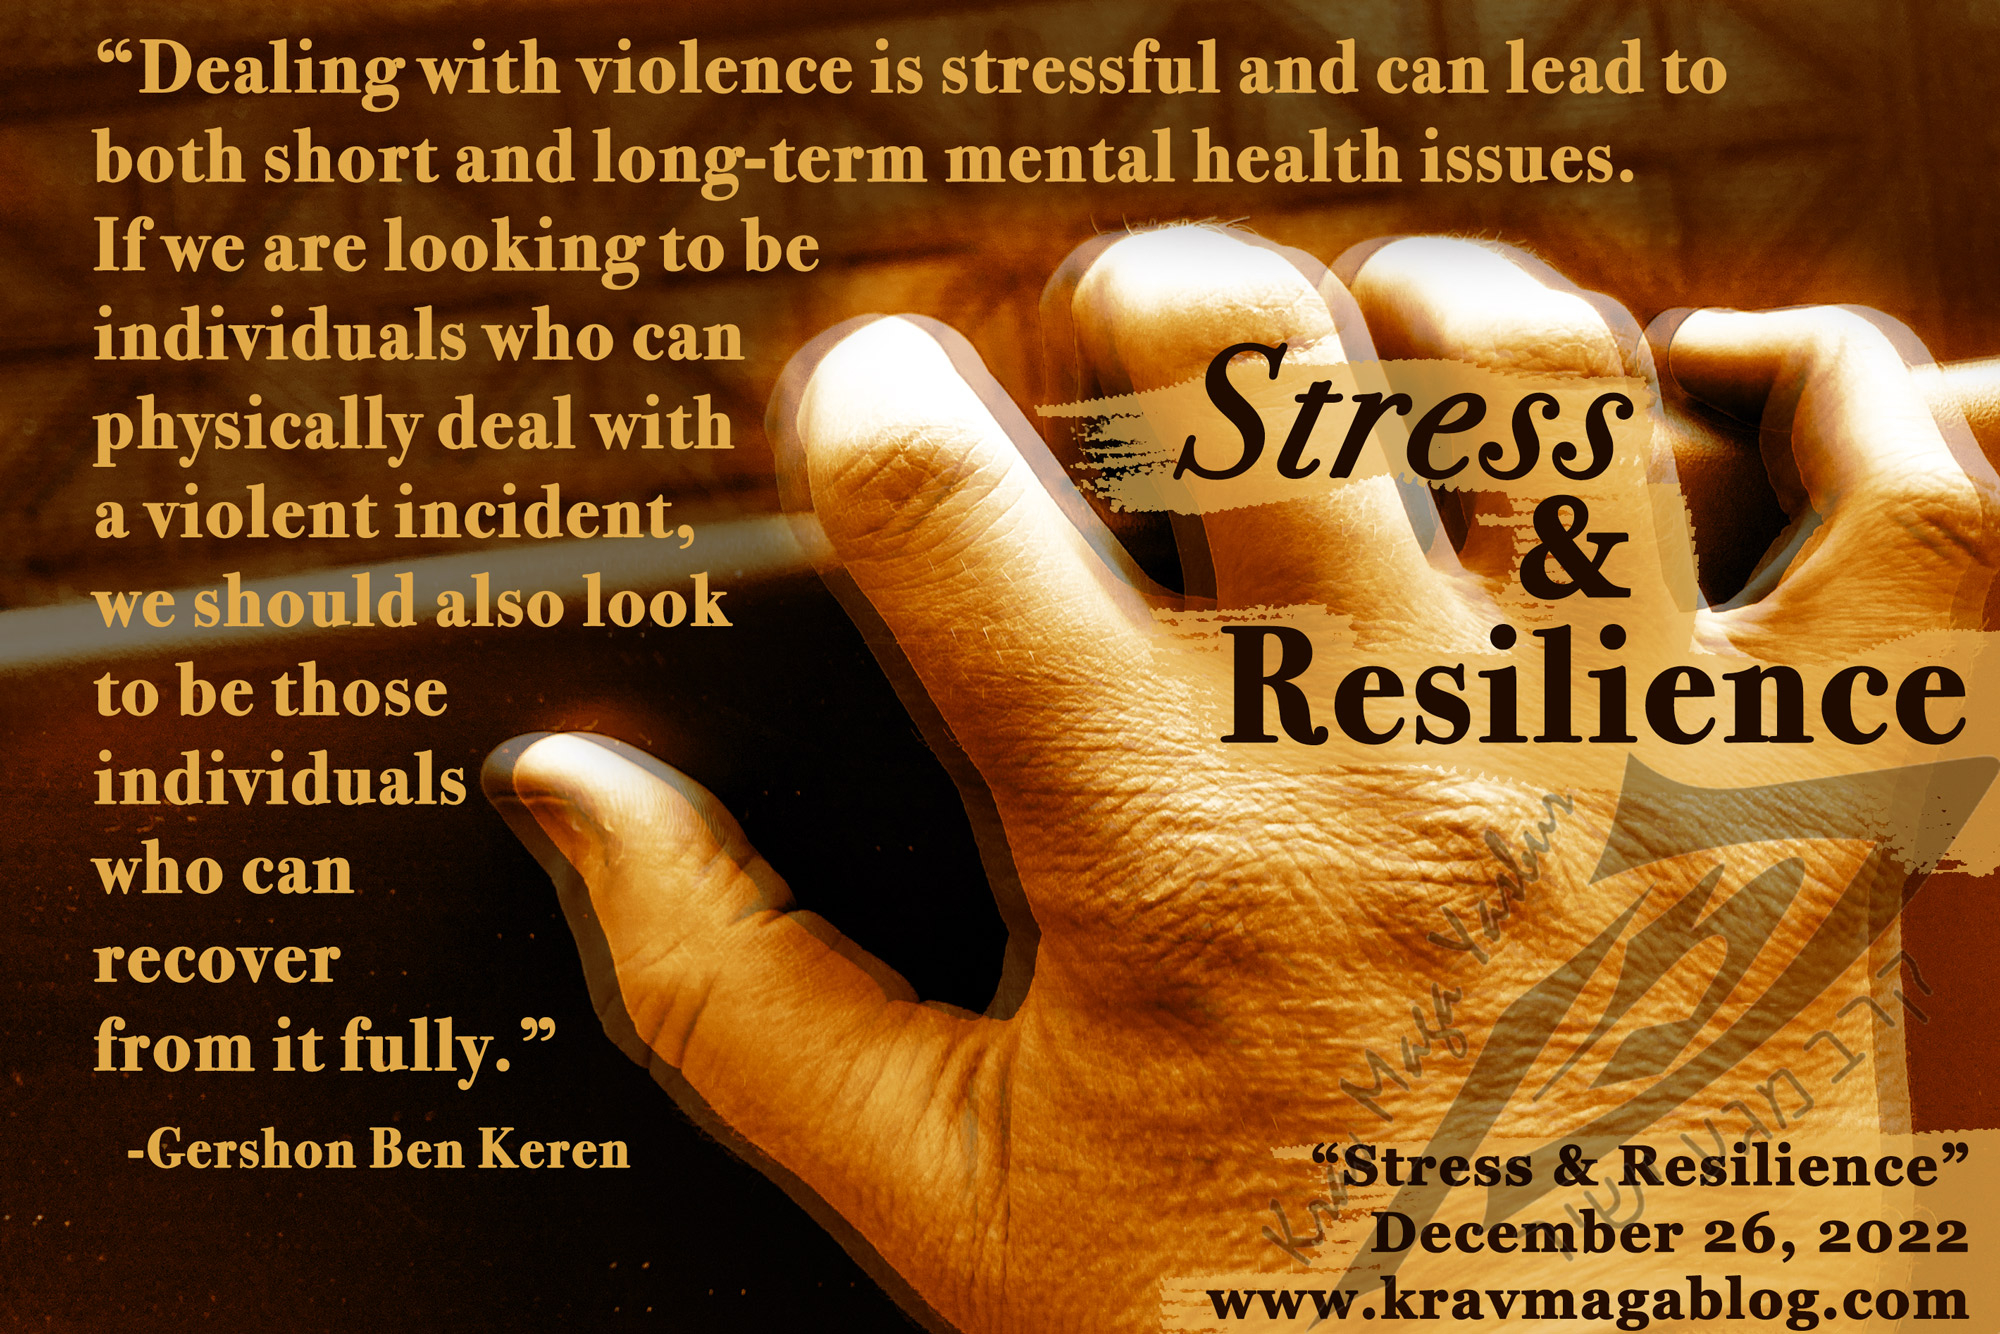 Stress & Resilience